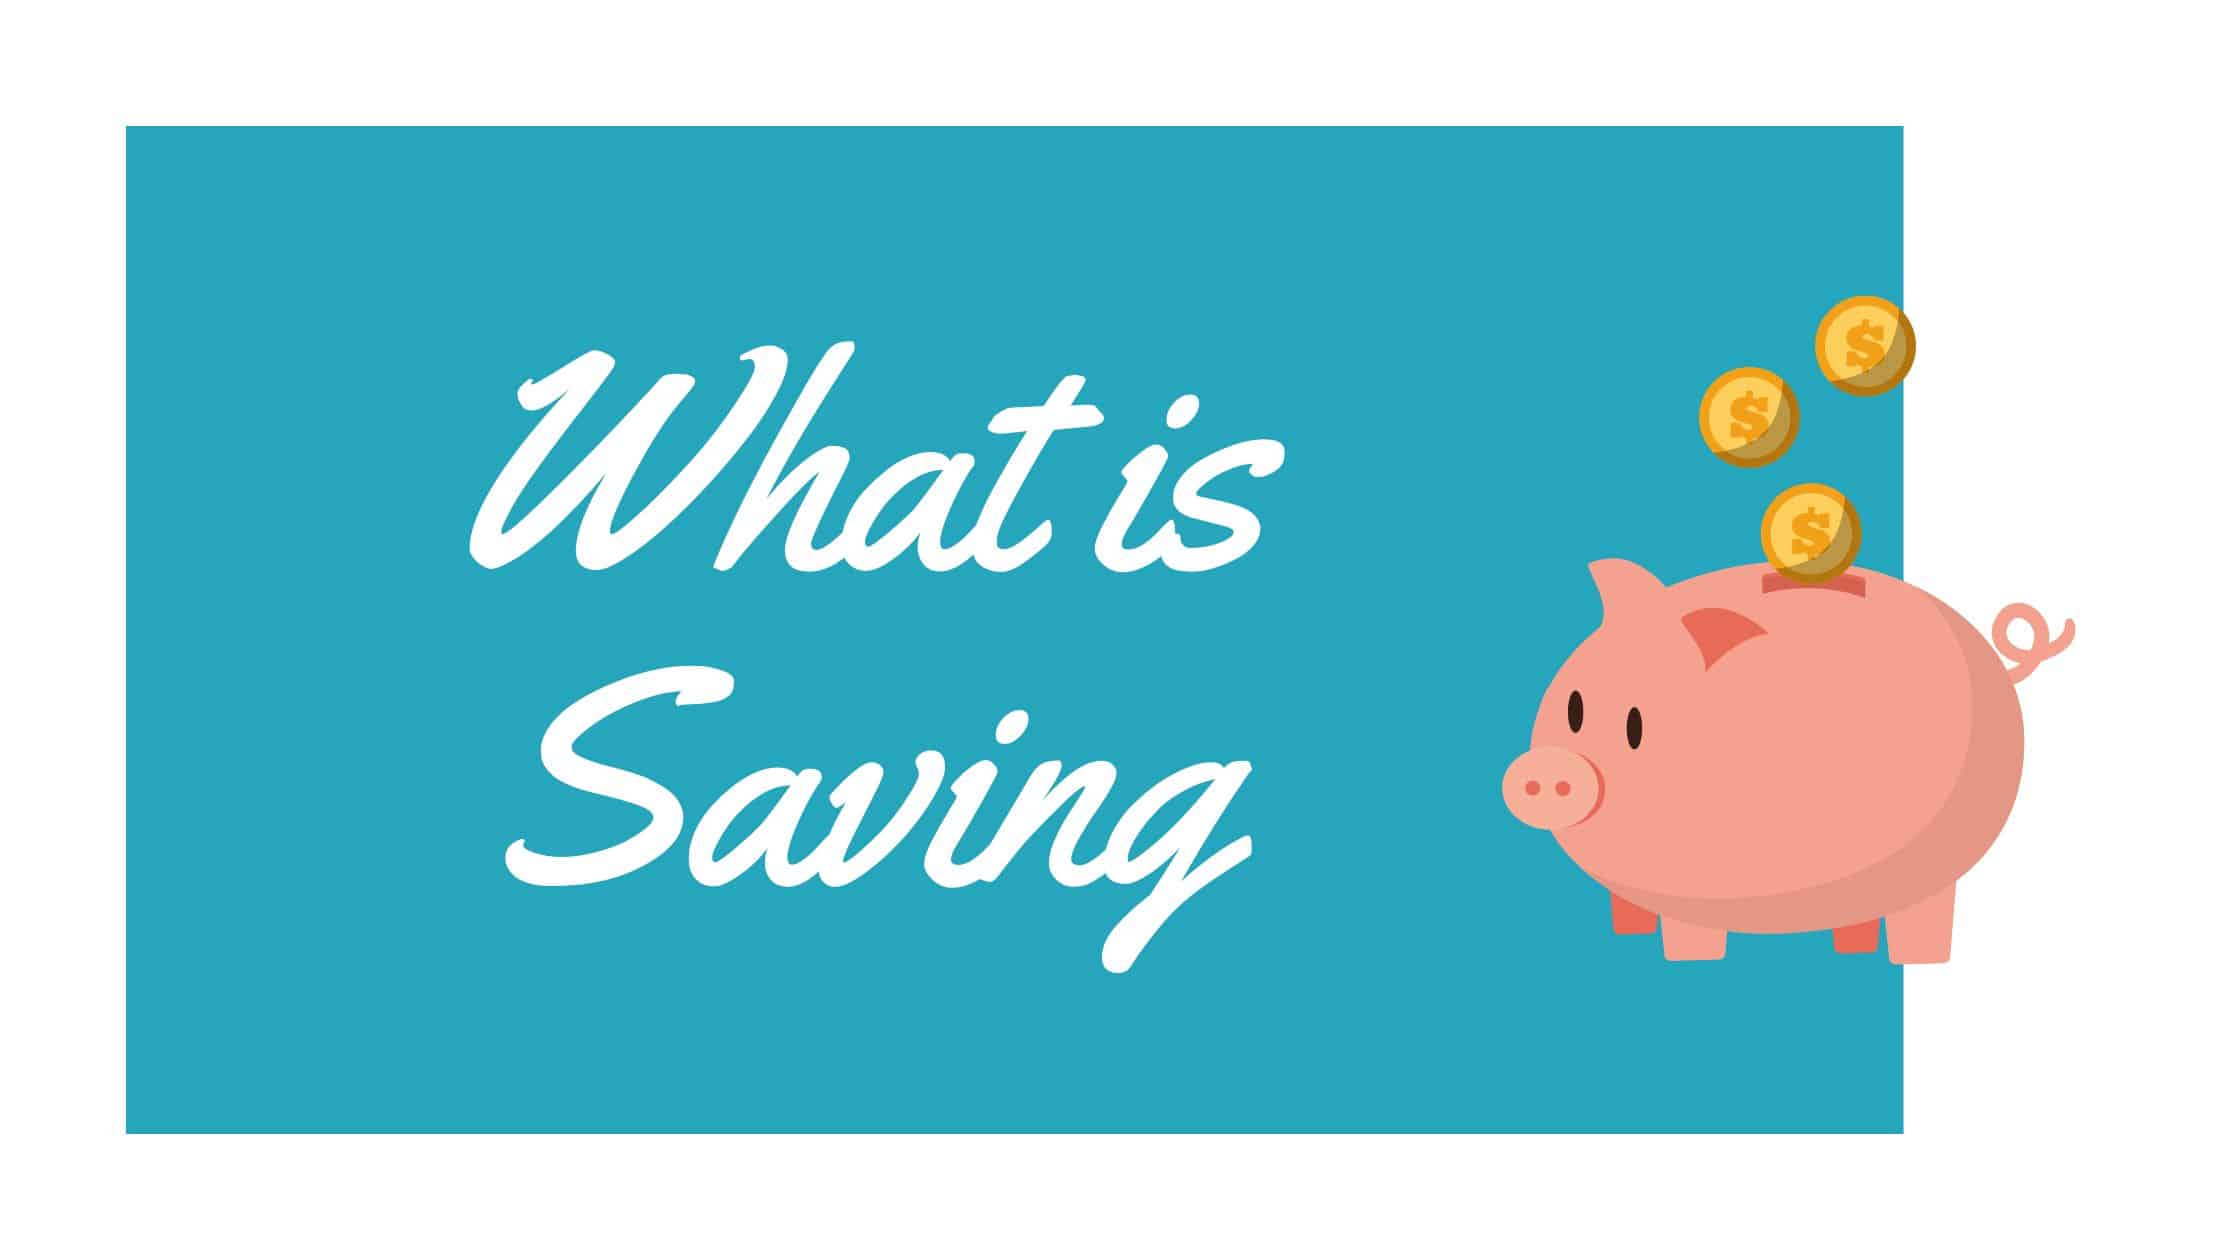 What is saving?